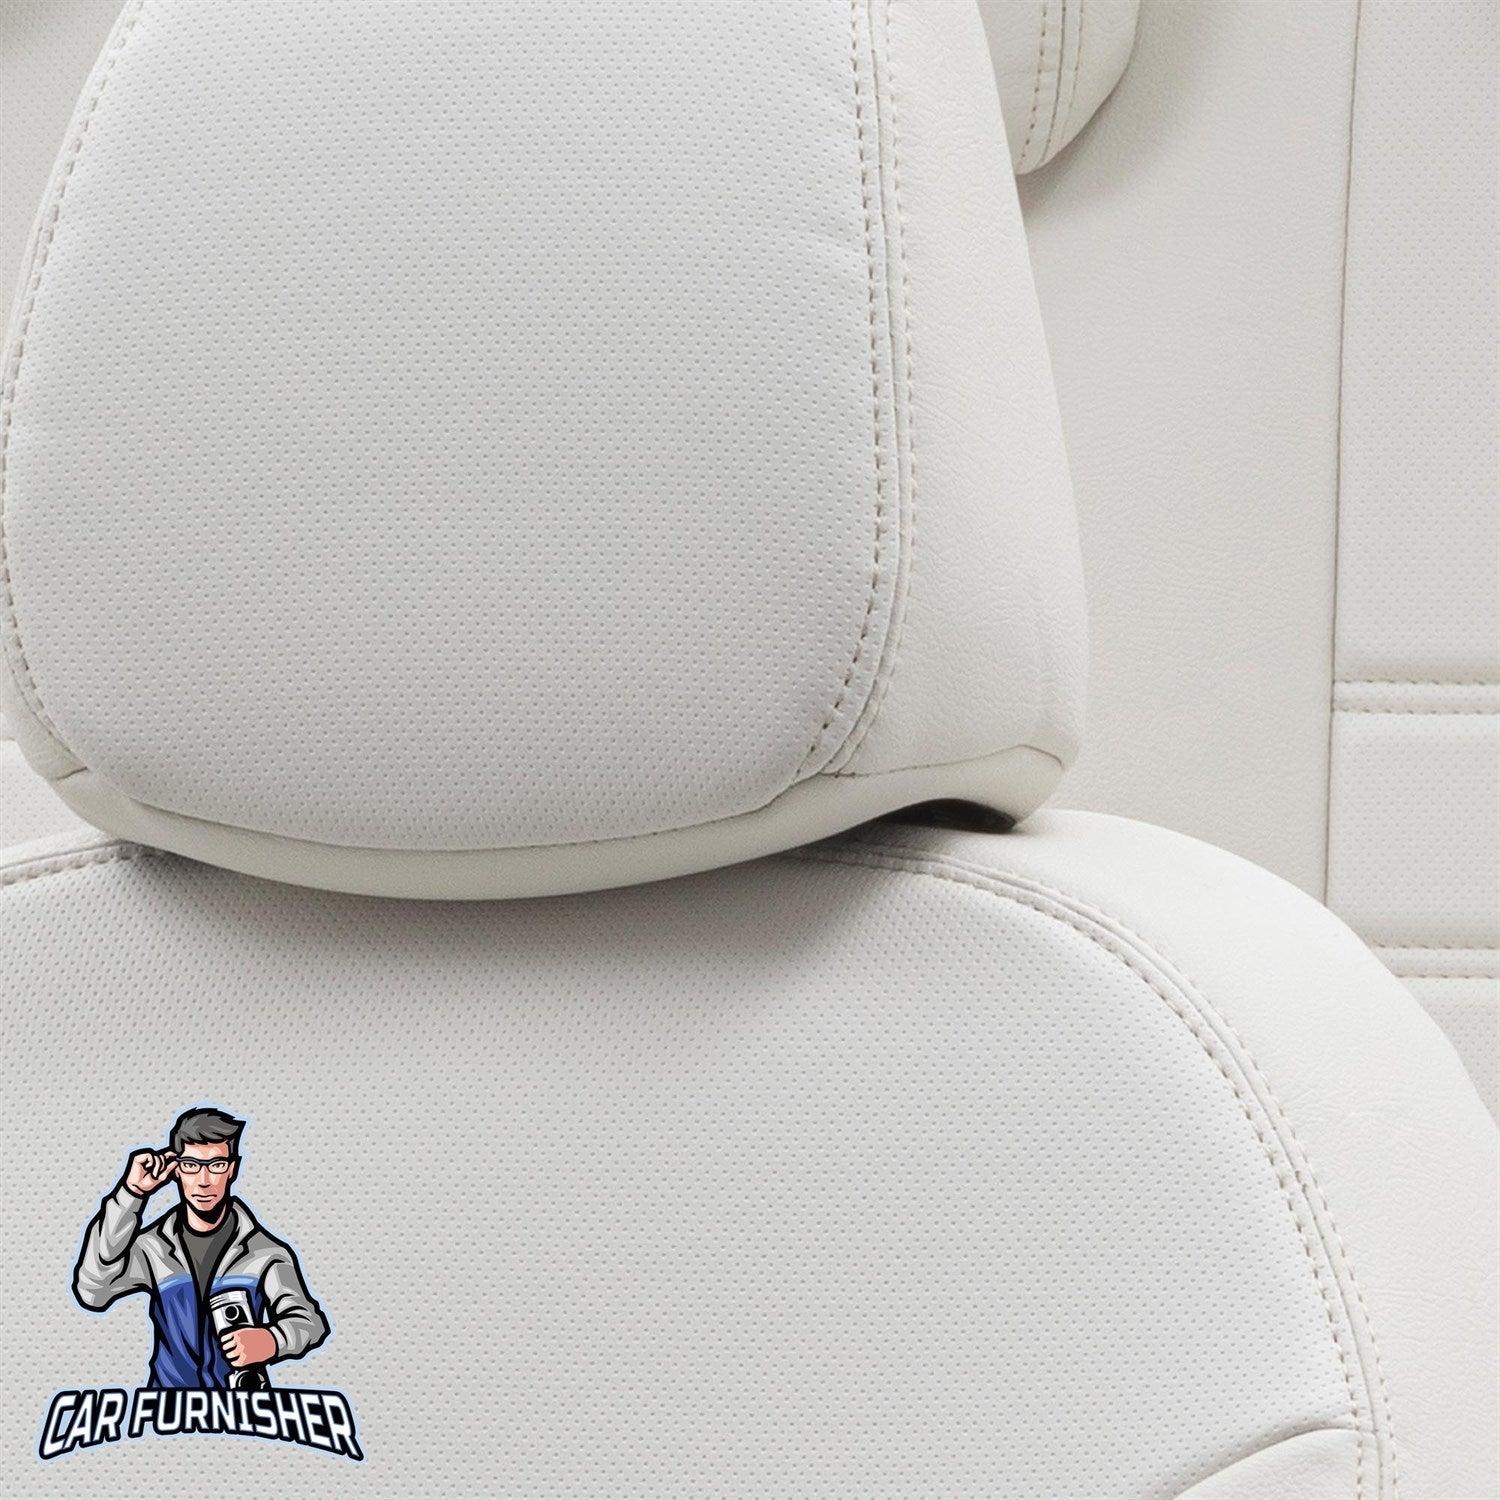 Toyota Proace City Seat Covers Istanbul Leather Design Ivory Leather